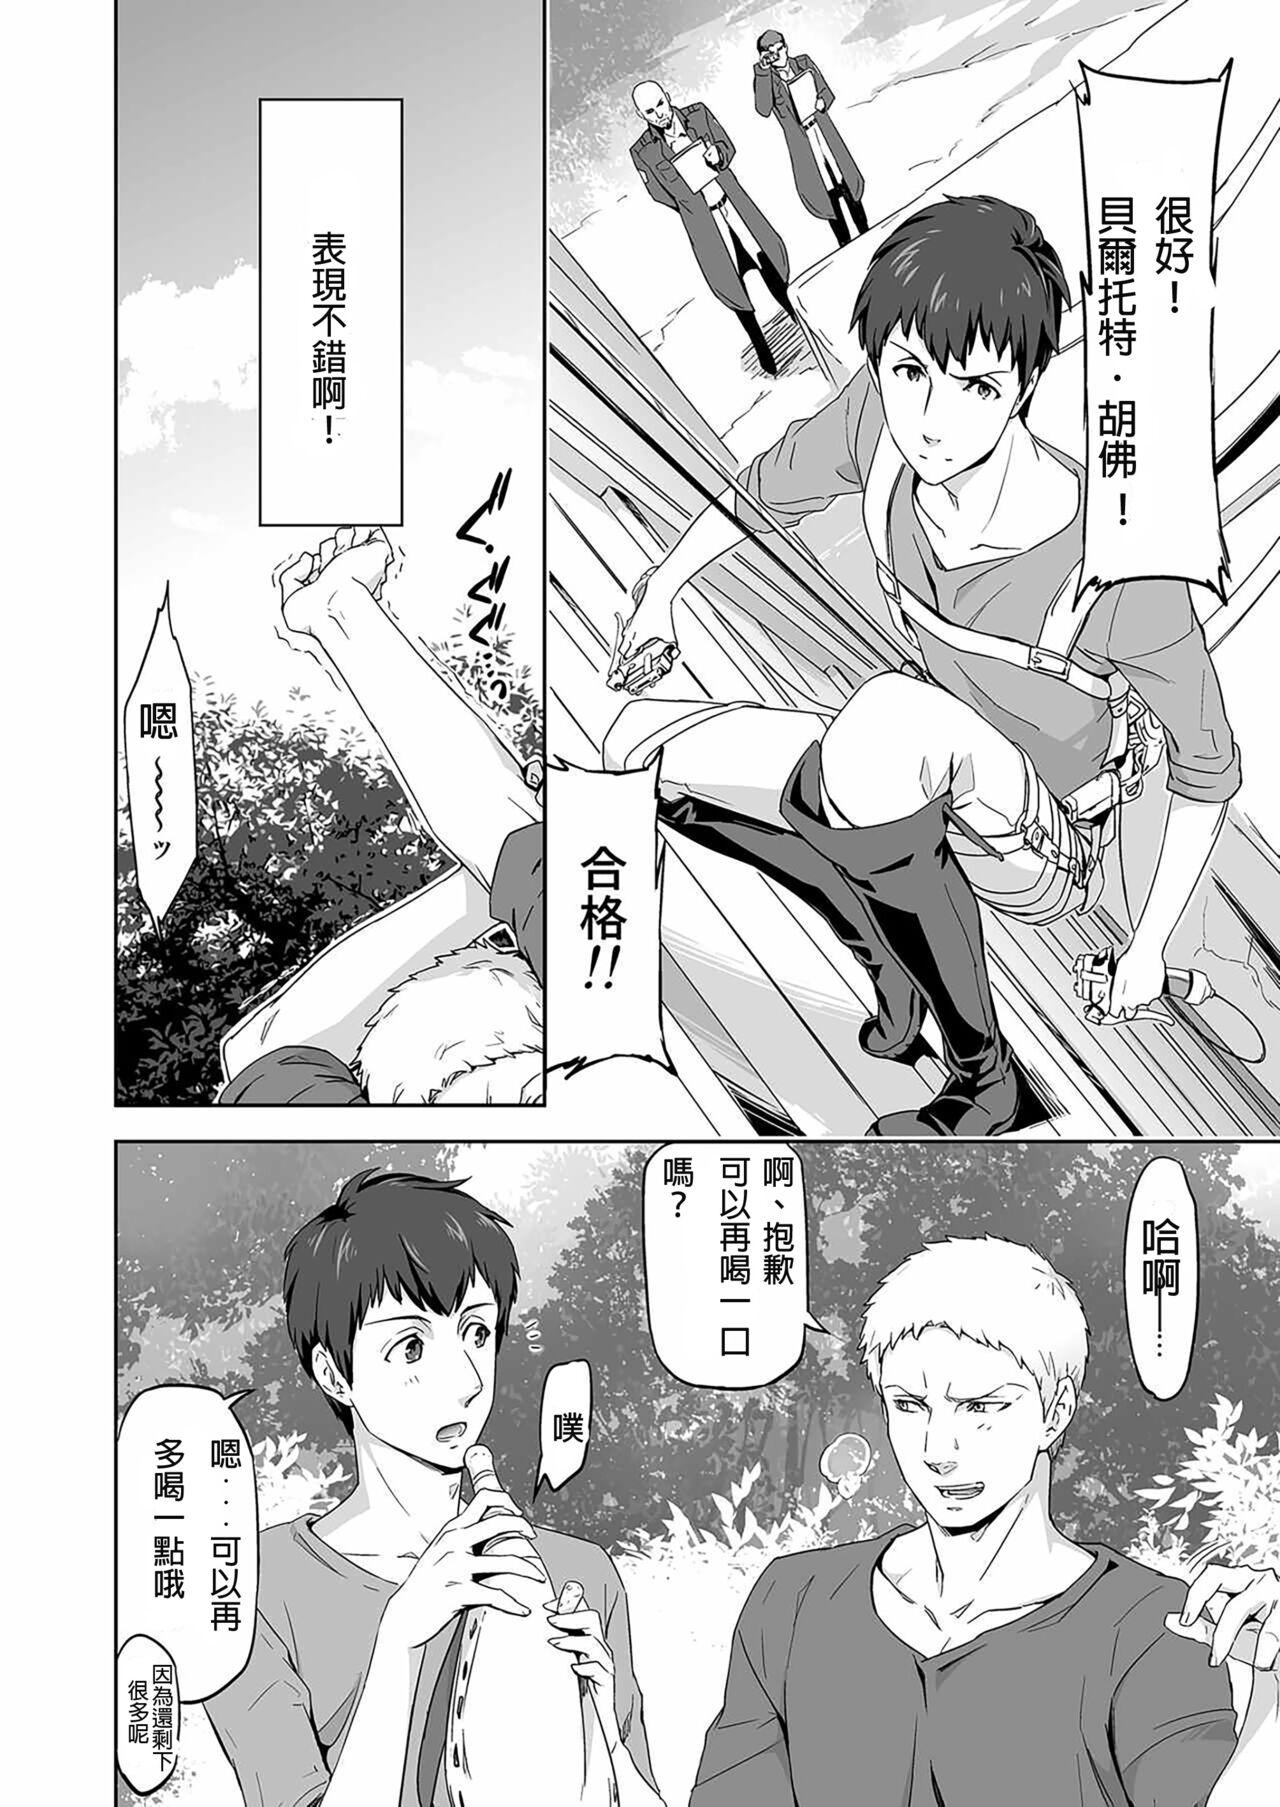 Fucking Pussy Reiner Braun x Bertolt Hoover   are the ma ssa cre - Shingeki no kyojin | attack on titan Family Taboo - Page 7